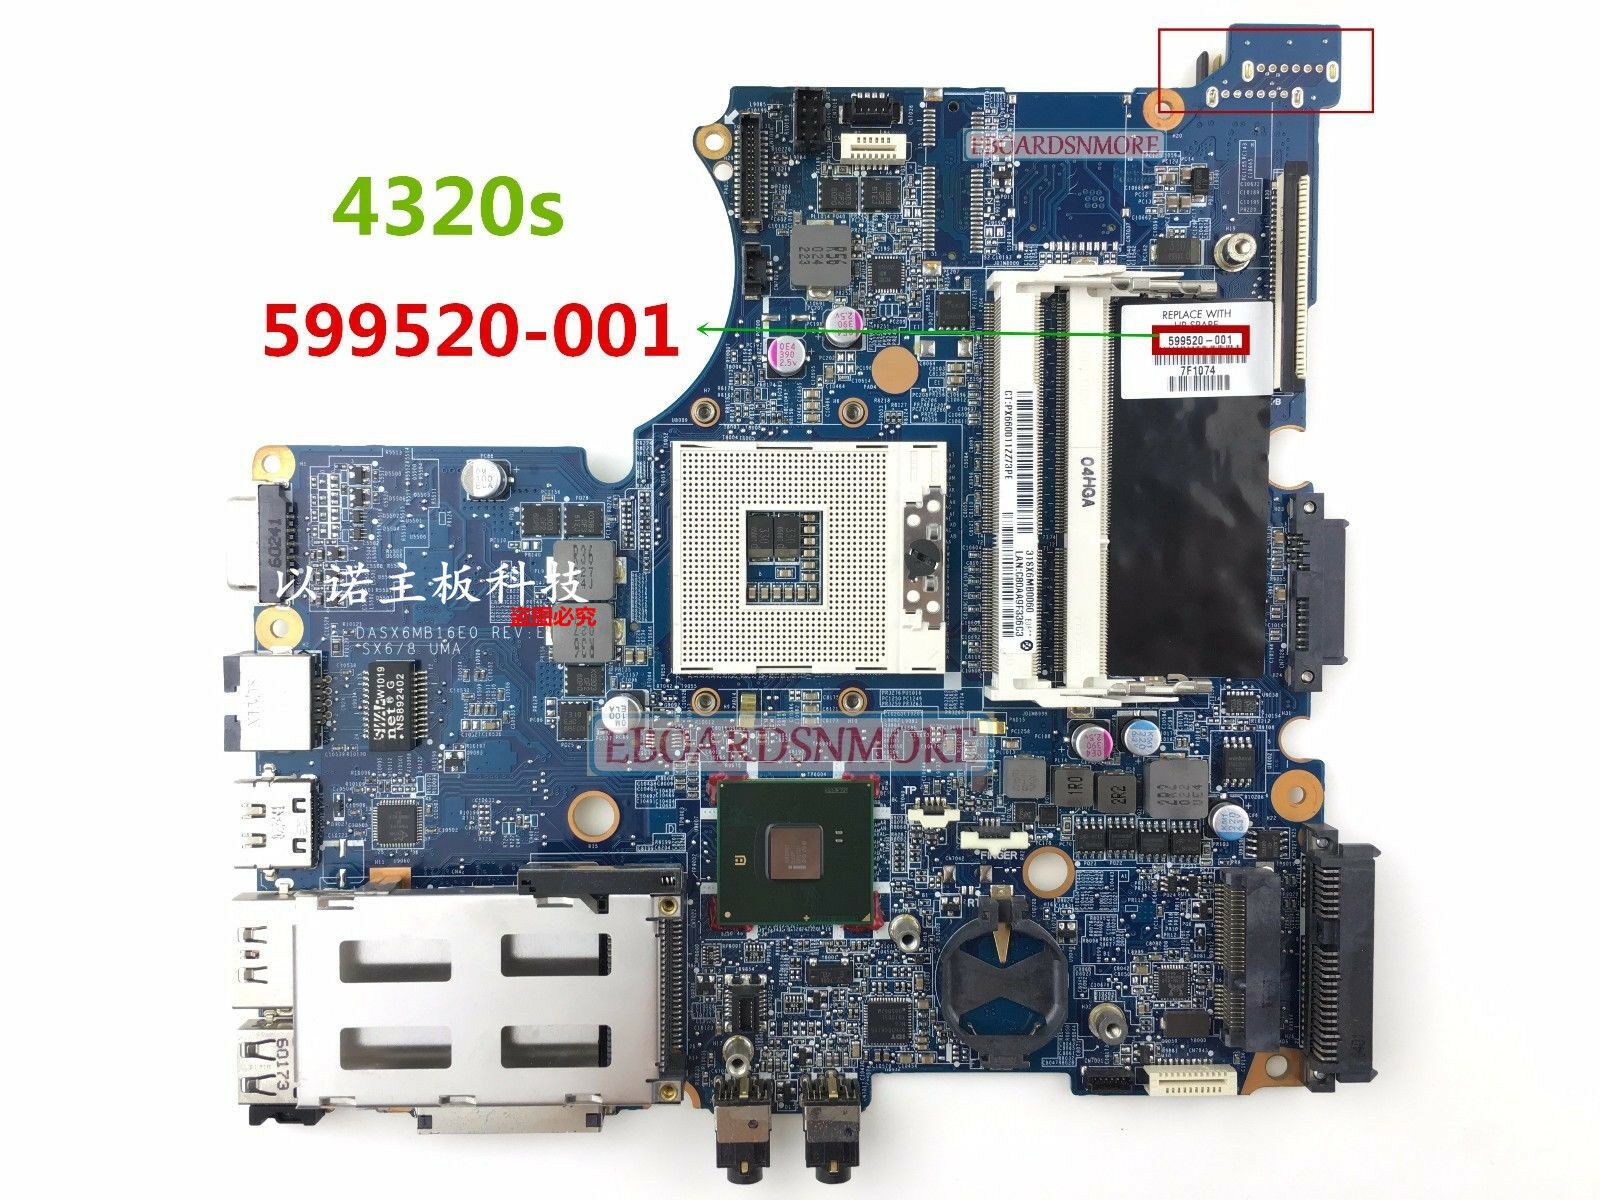 599520-001 HM57 Motherboard for HP PROBOOK 4320 4320S laptop,DASX6MB16E0 DDR3"A" Compatible CPU Brand: Inte